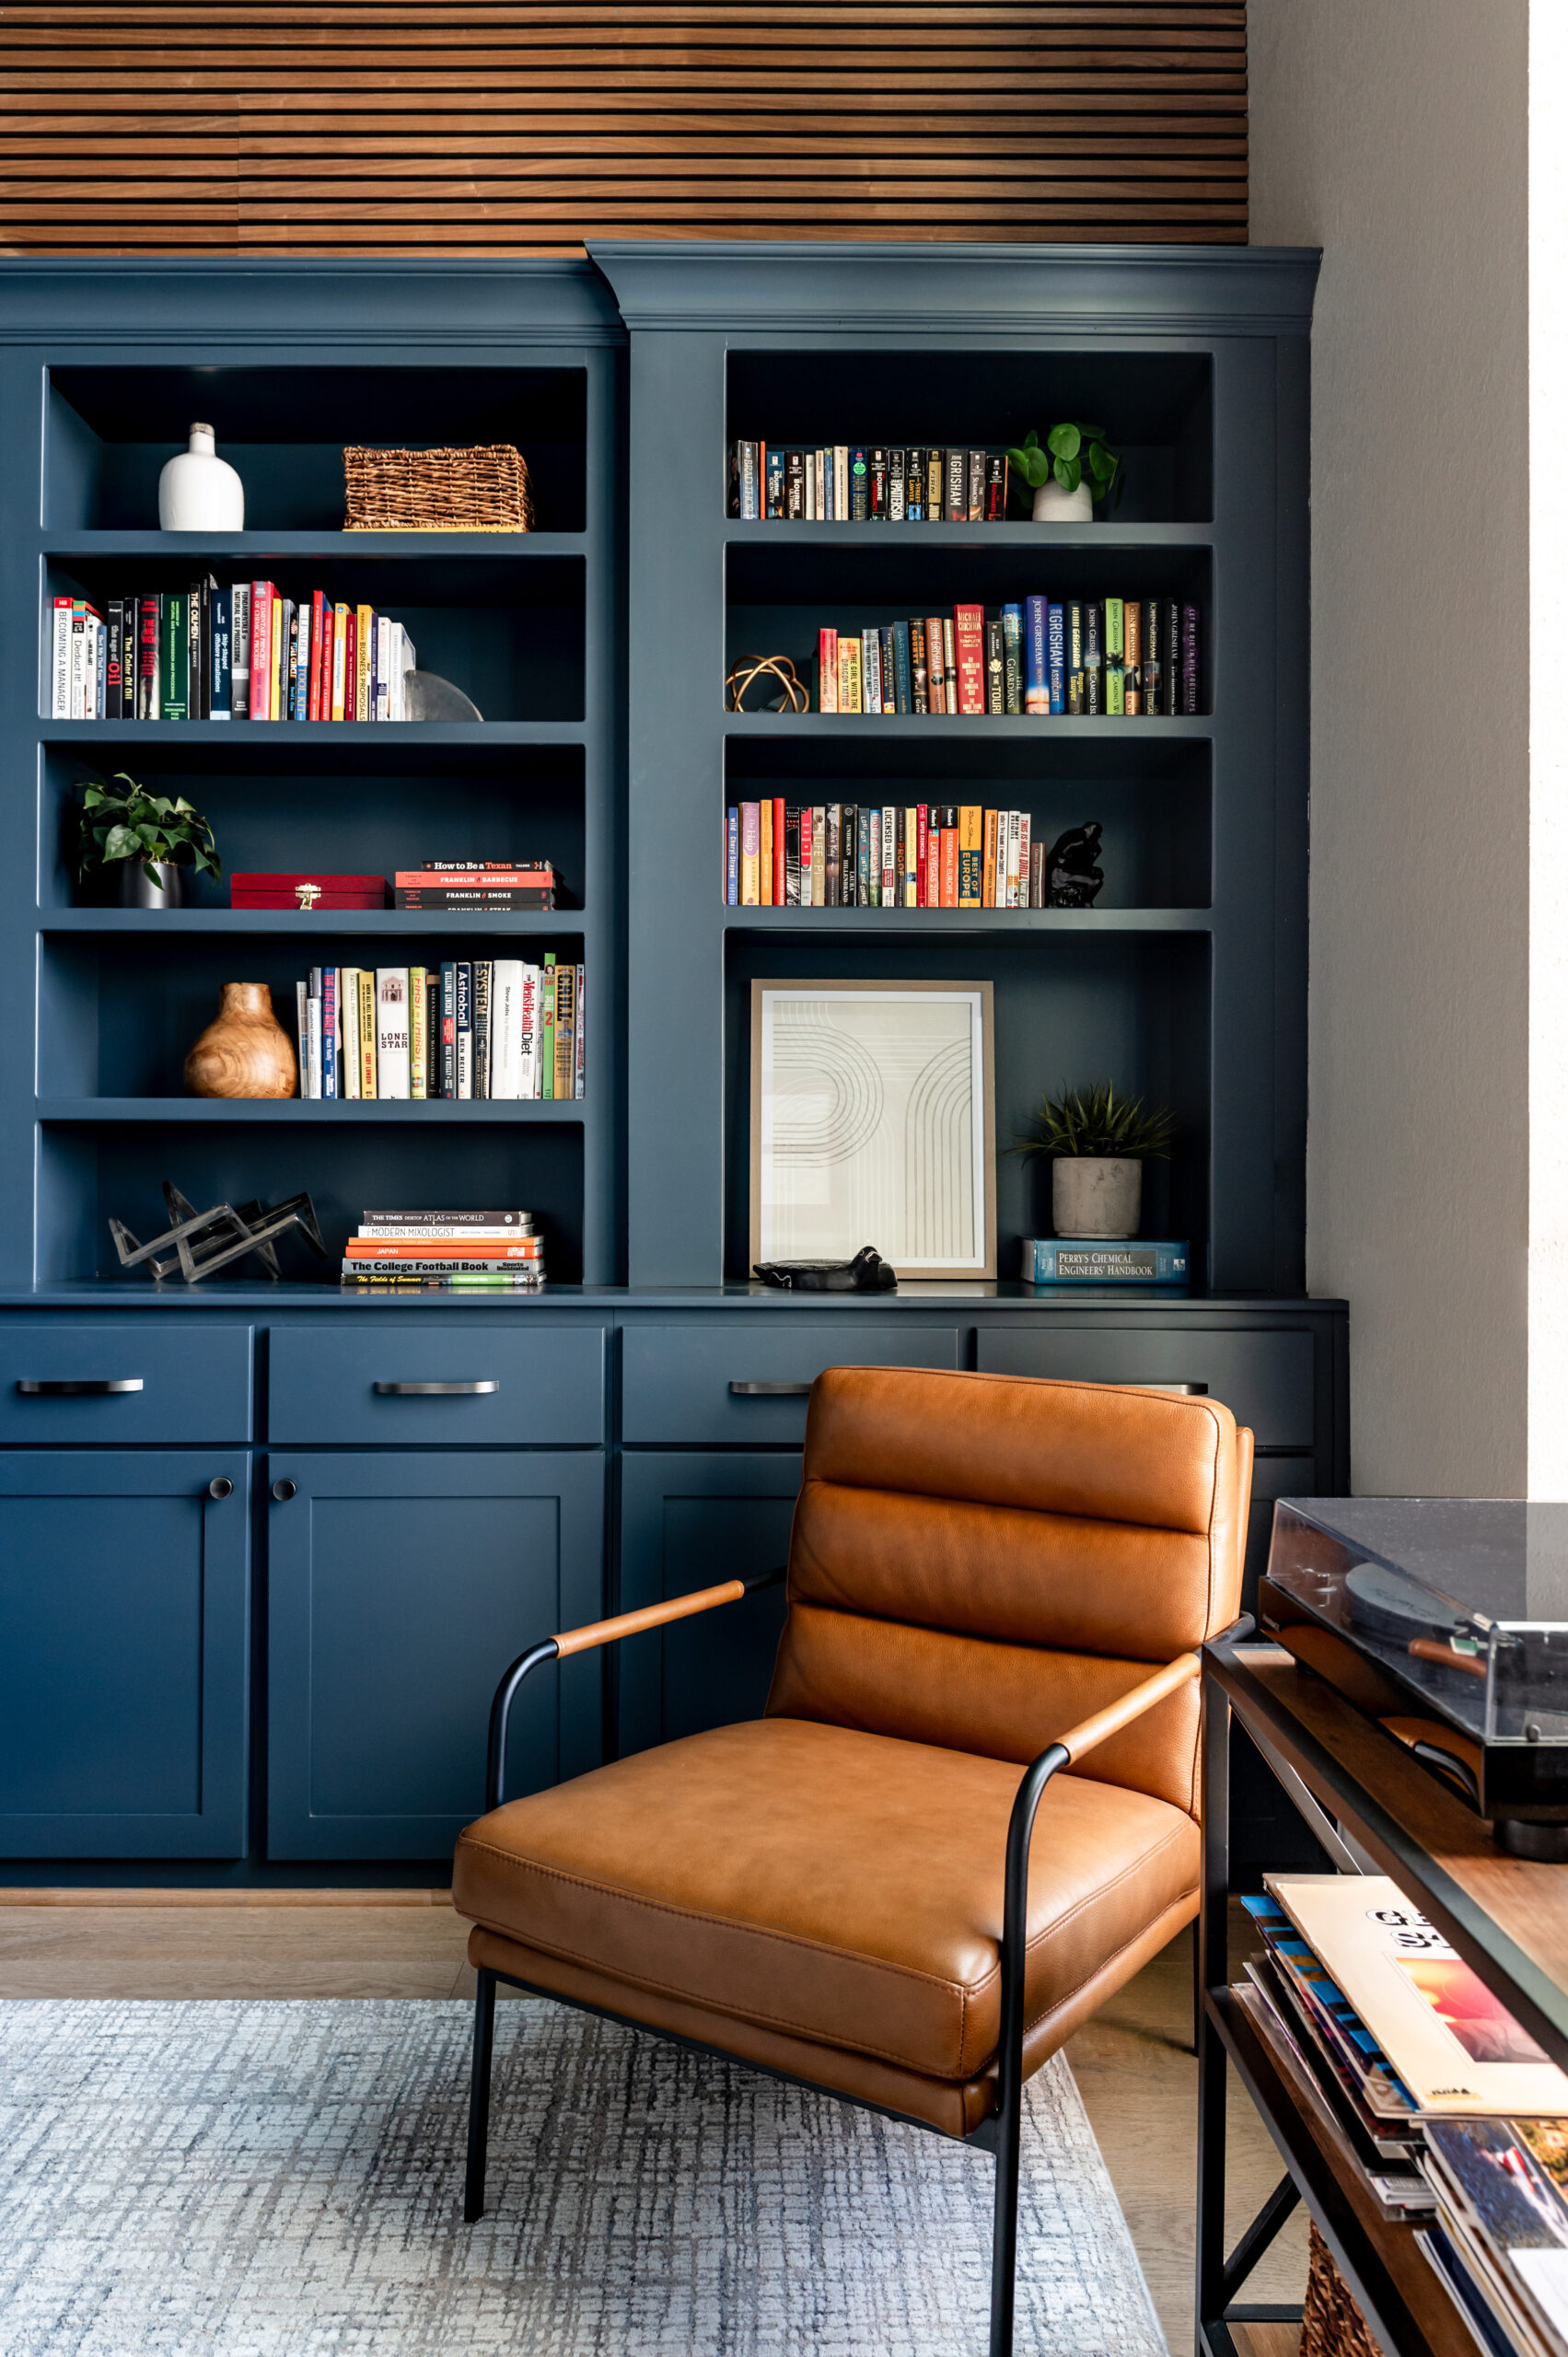 Office interior design with blue book shelf and leather chair